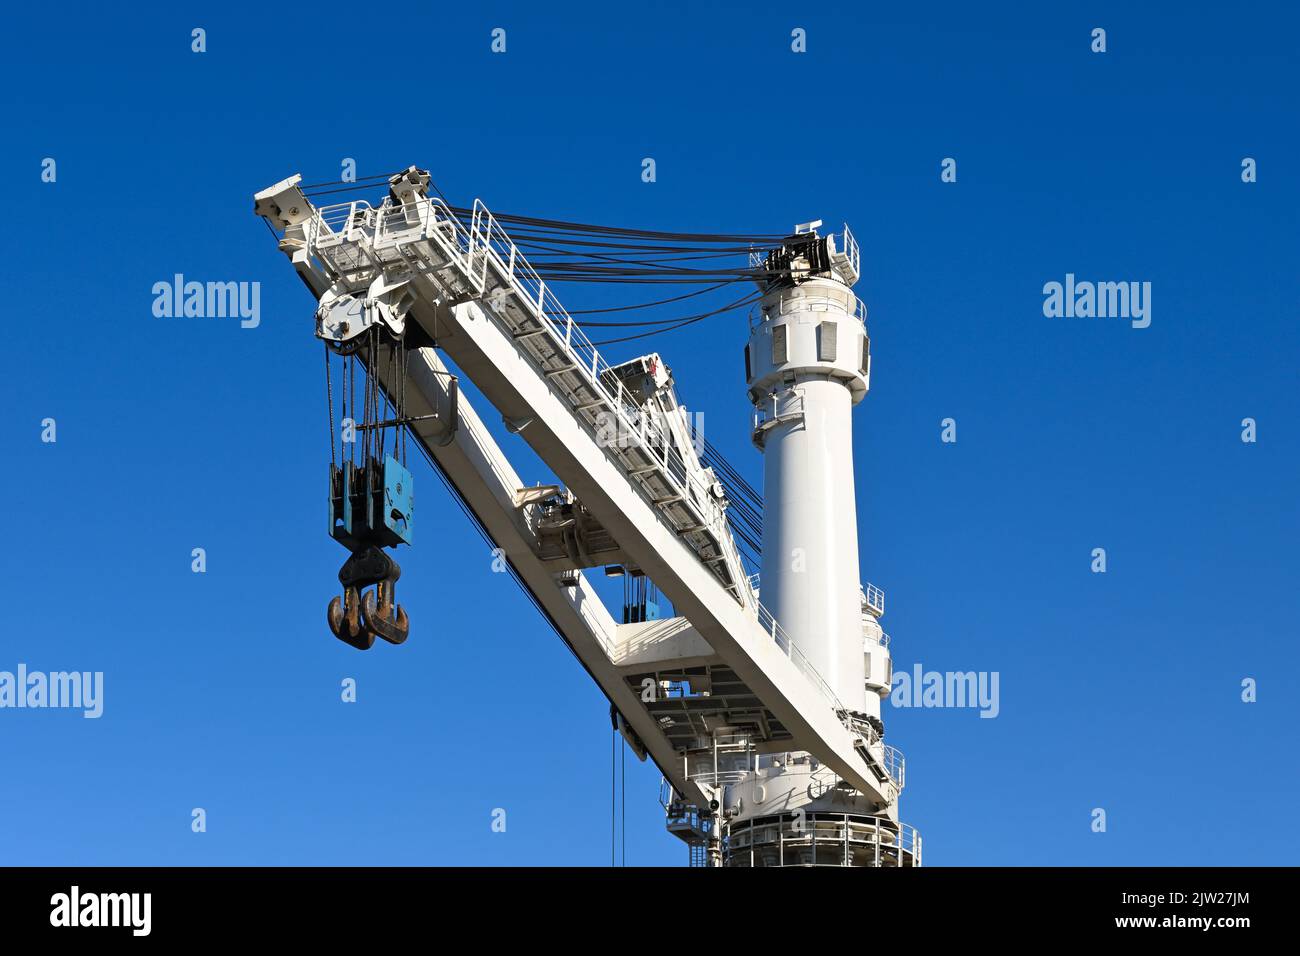 Outdoor crane used in ship industry, electric overhead traveling crane above the vessel Stock Photo